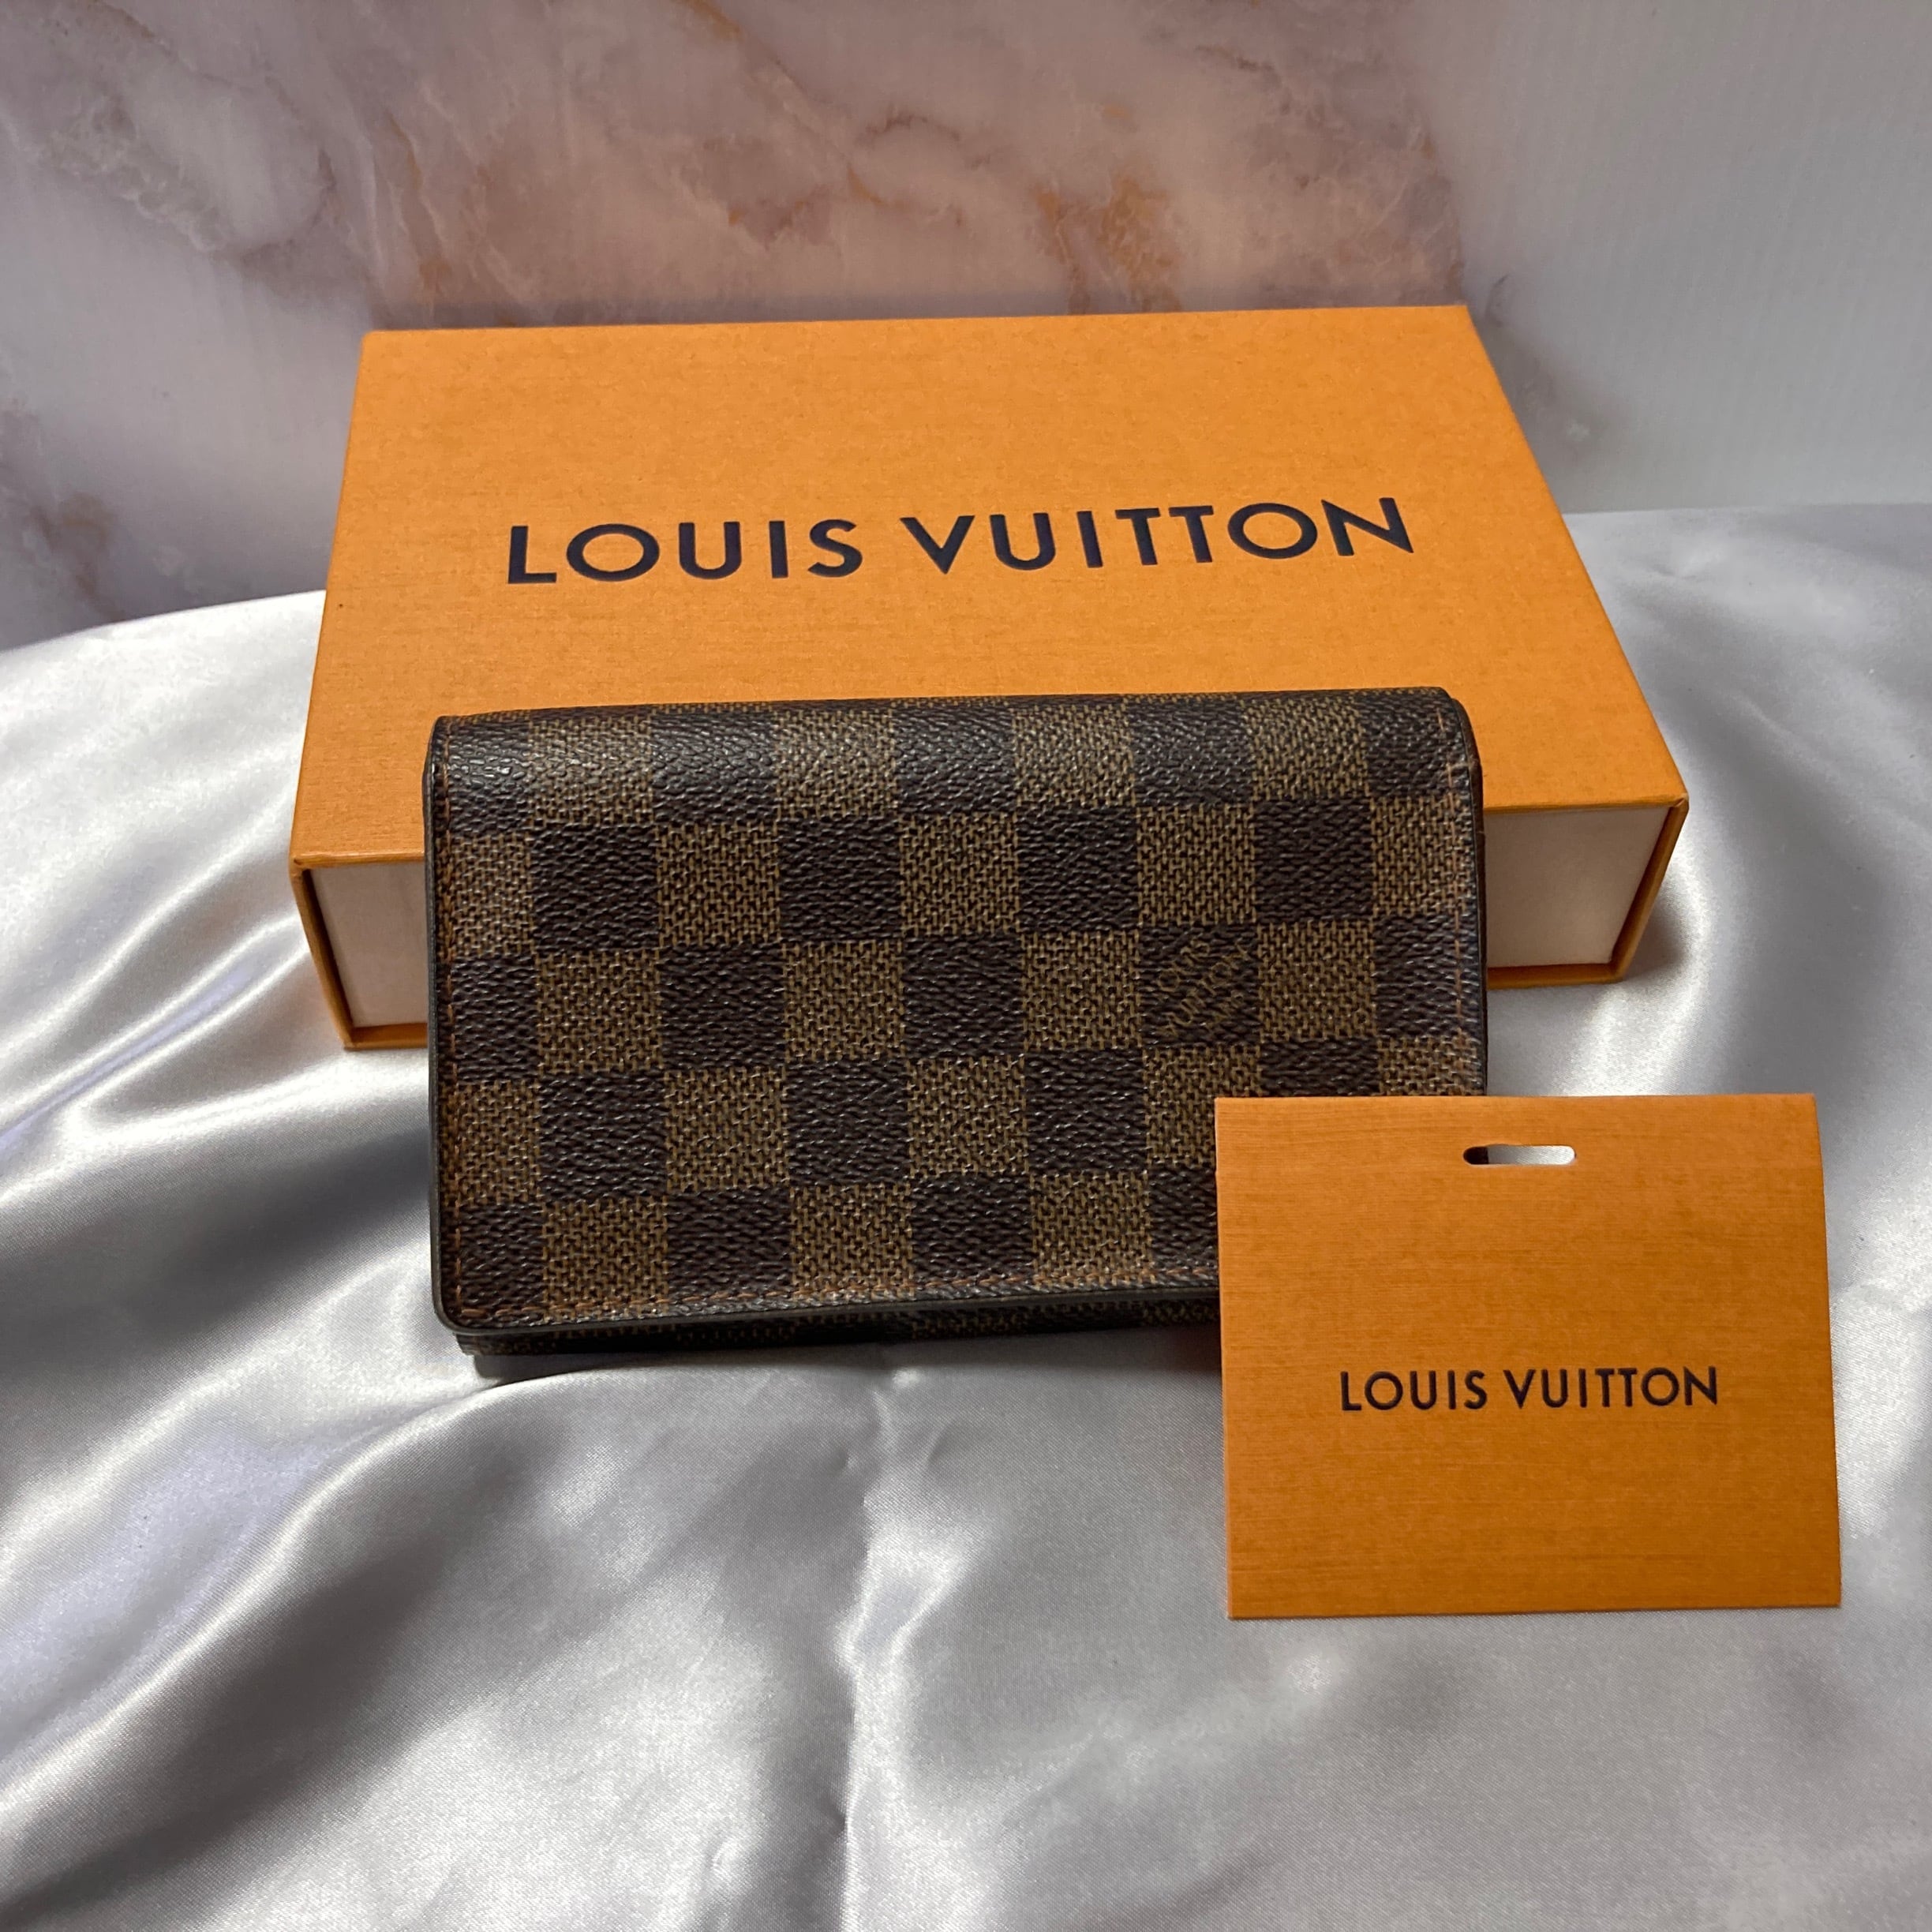 LOUIS VUITTON】ルイヴィトン ダミエ ポルトフォイユトレゾール 財布